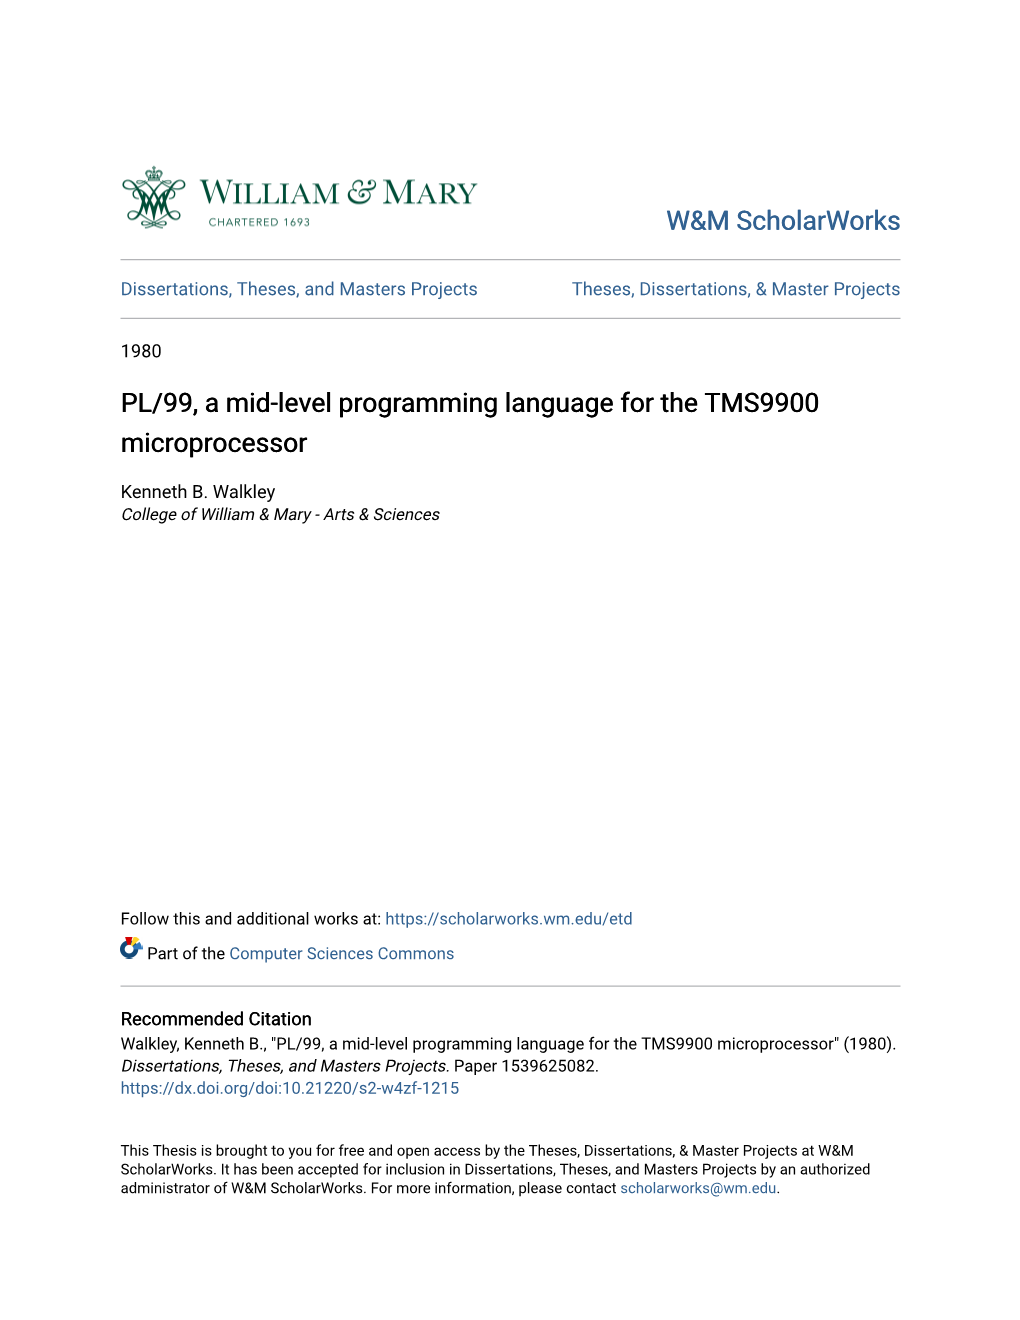 PL/99, a Mid-Level Programming Language for the TMS9900 Microprocessor